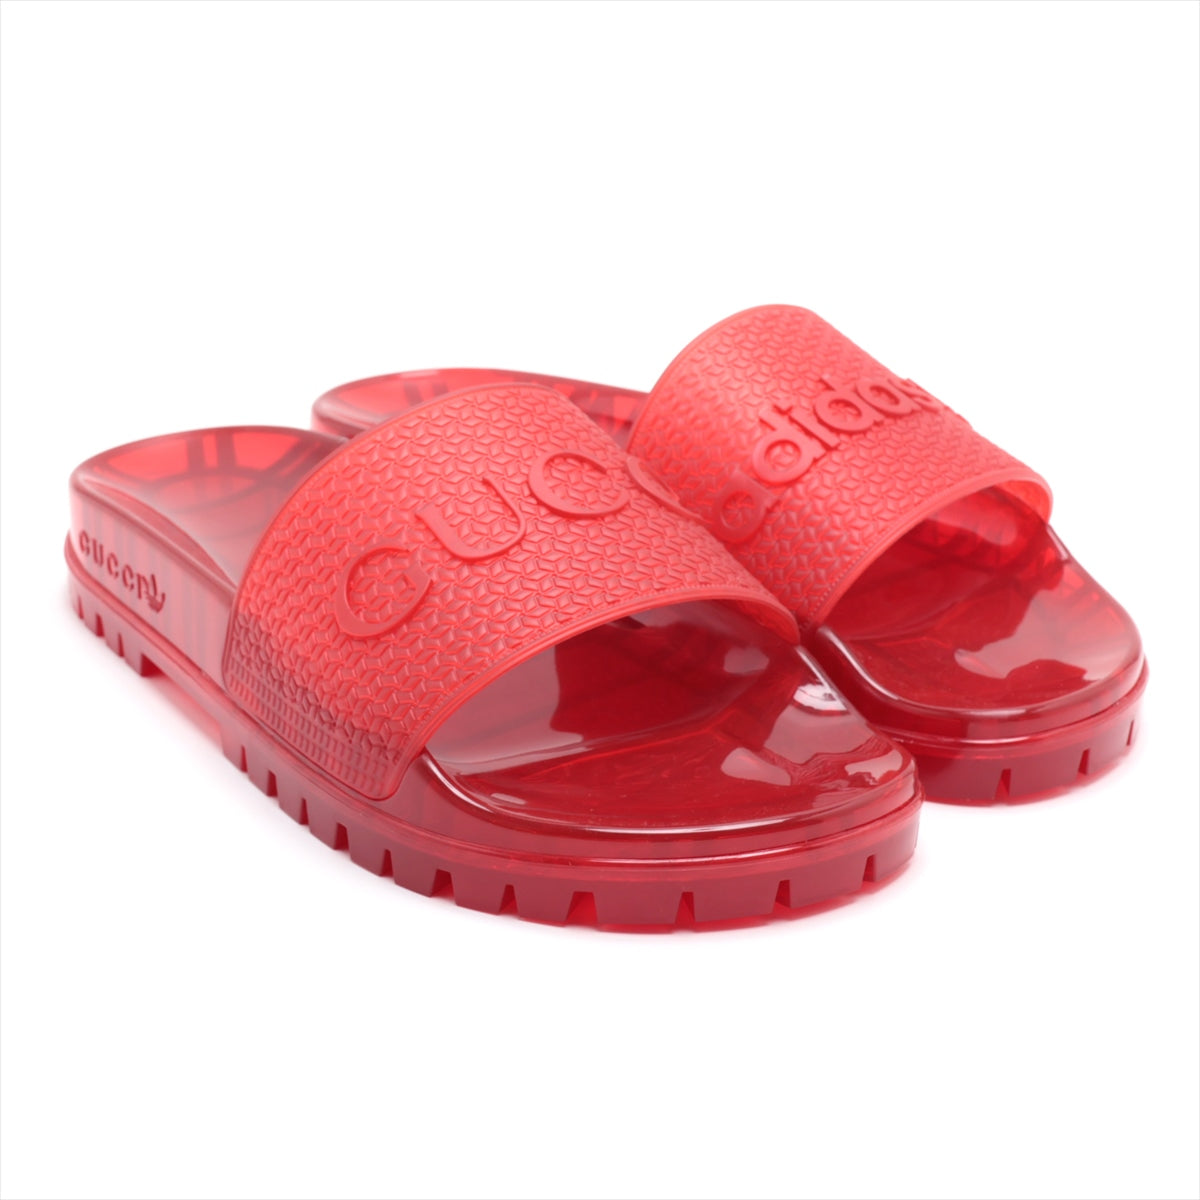 Gucci x adidas Adiletta Rubber Sandals 7 Men's Red box There is a storage bag